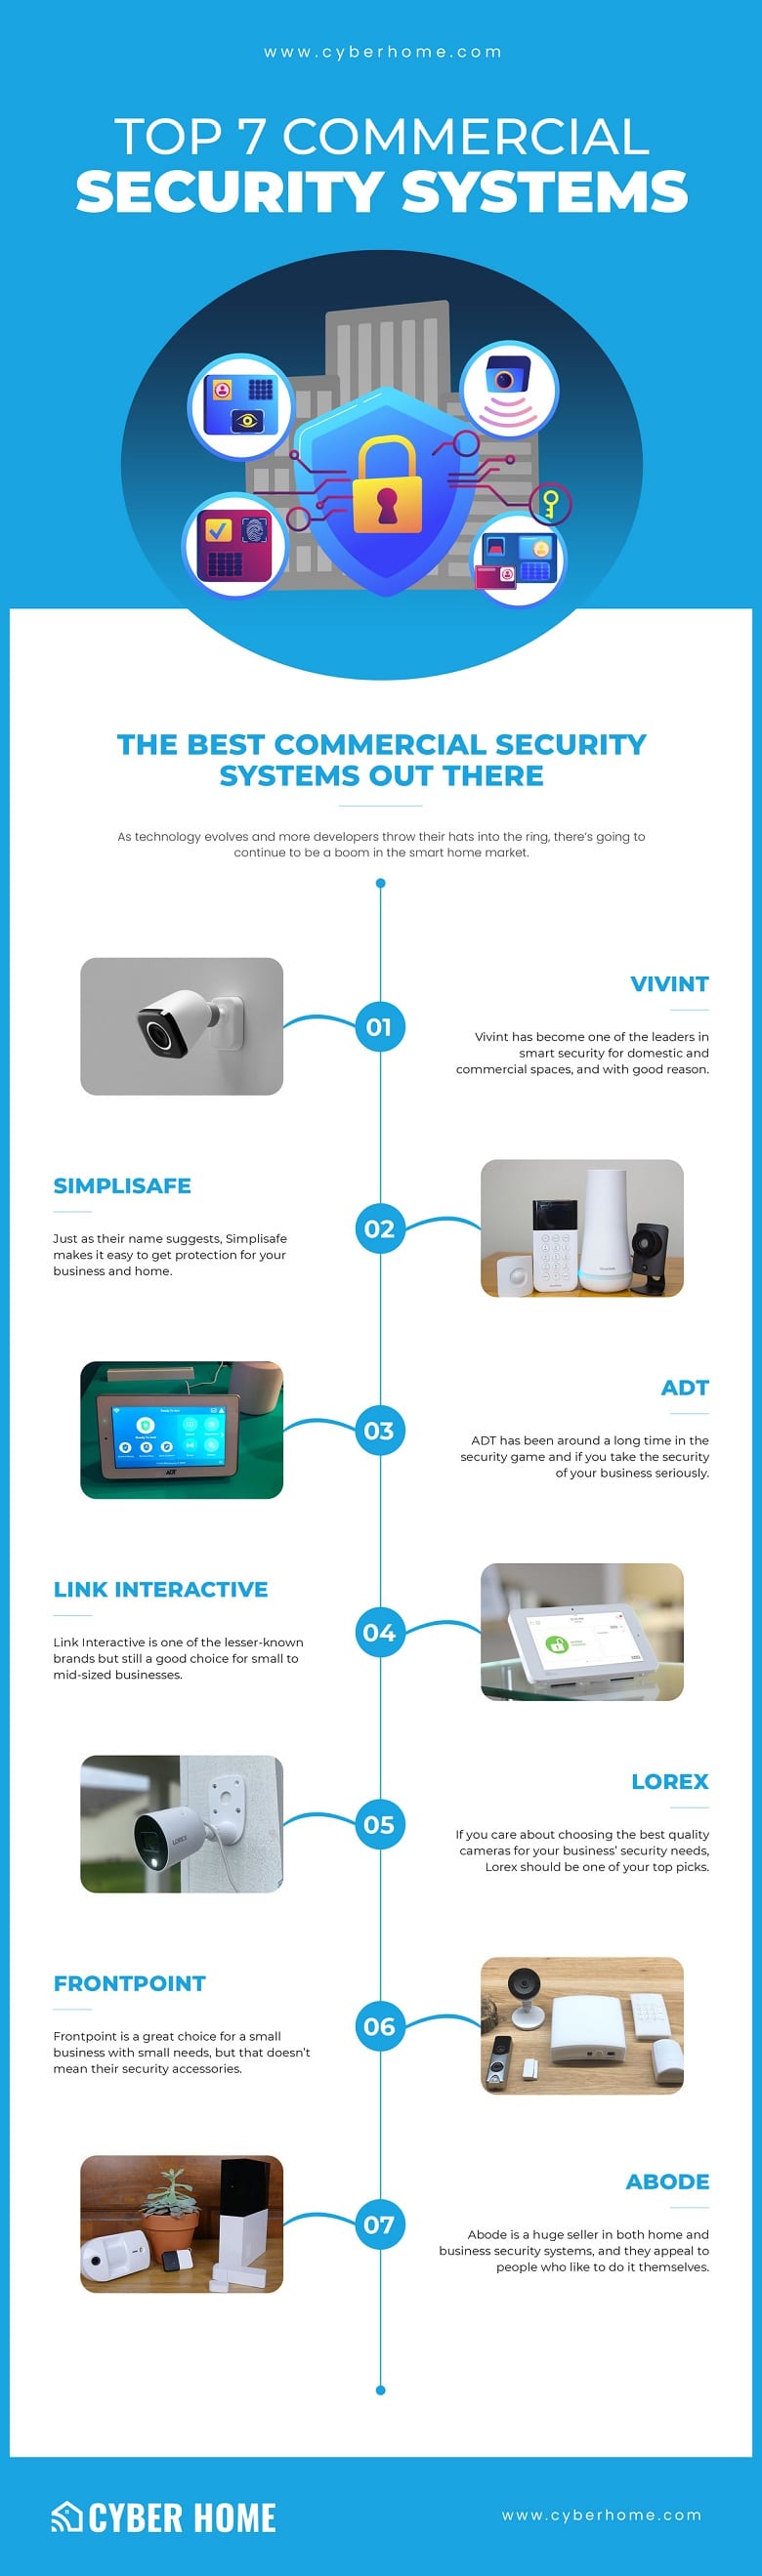 security systems